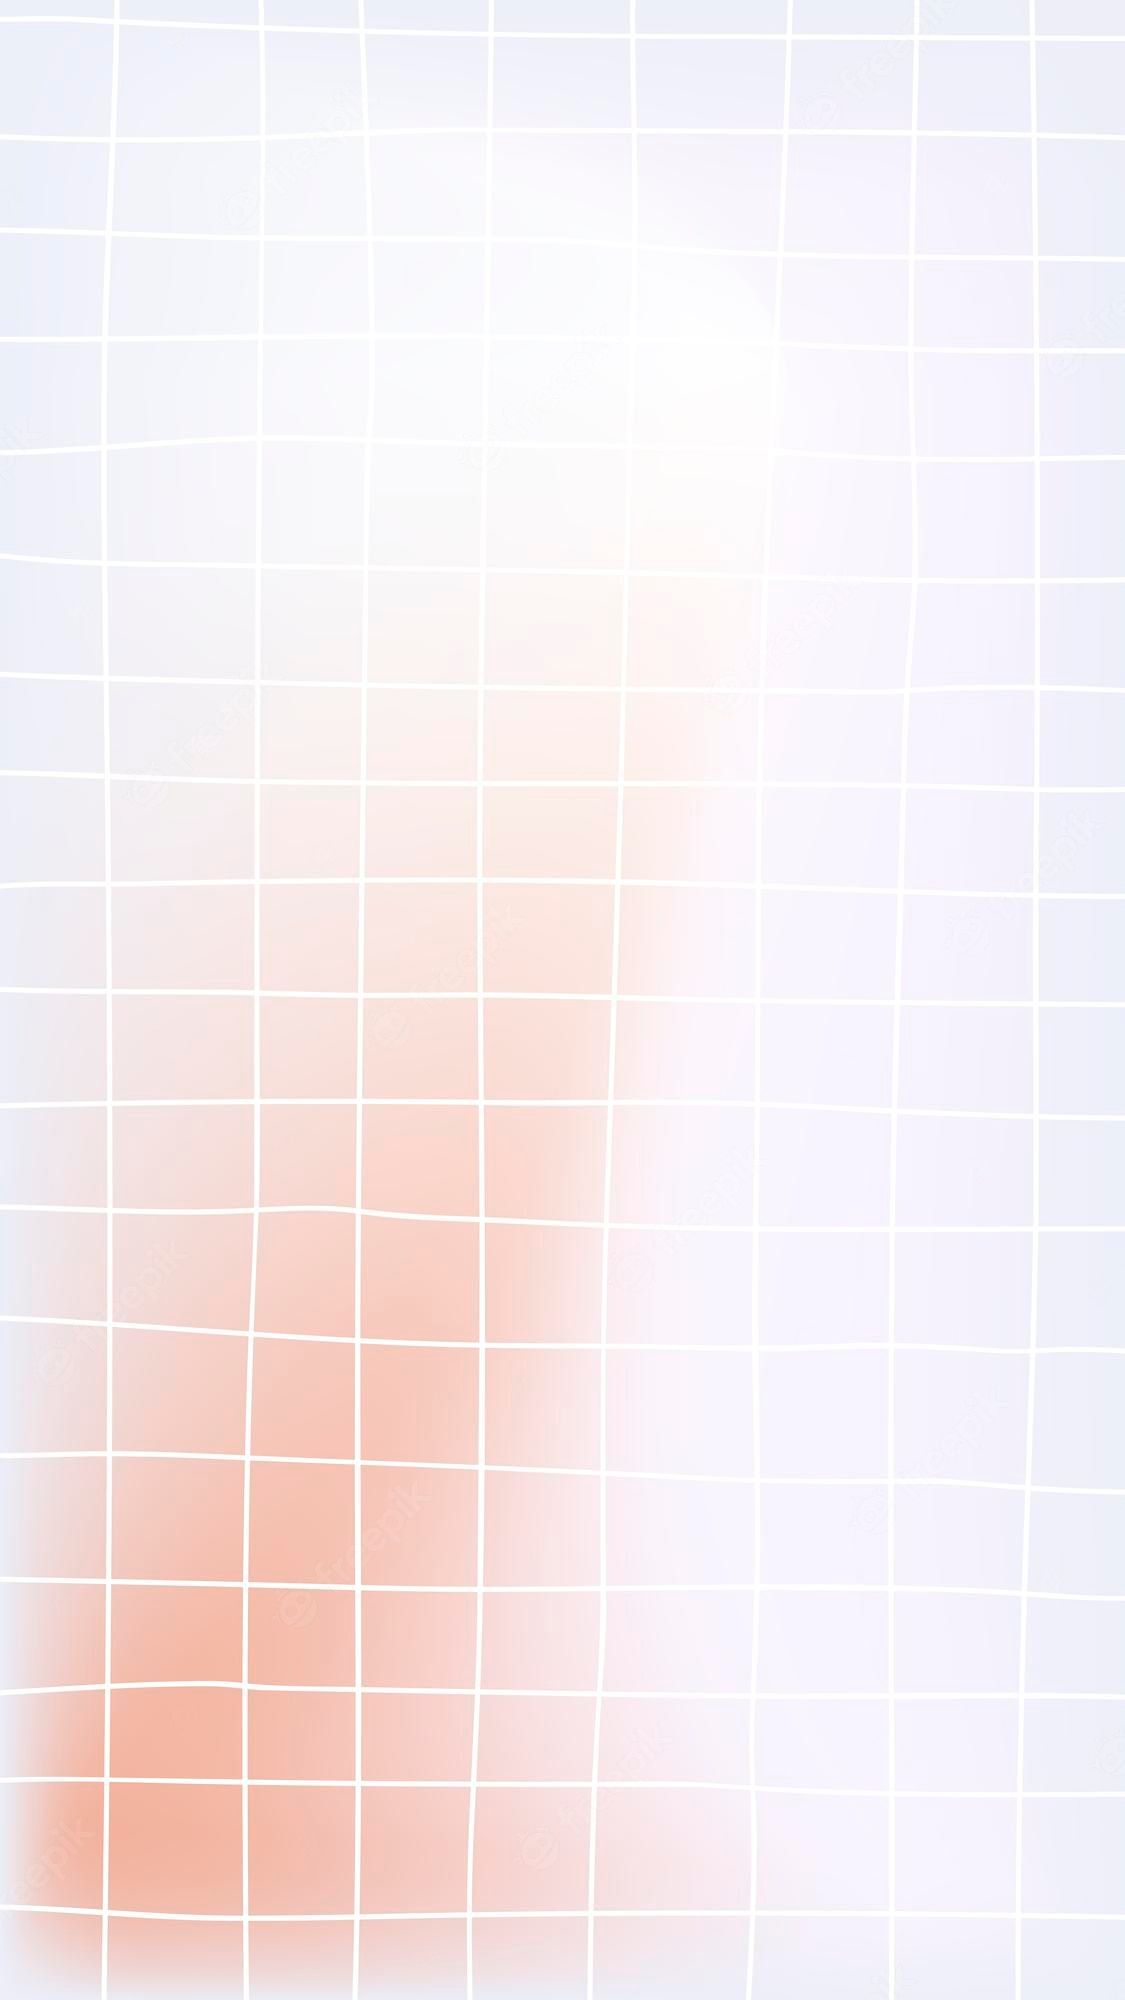 A white and pink grid with some lines - Grid